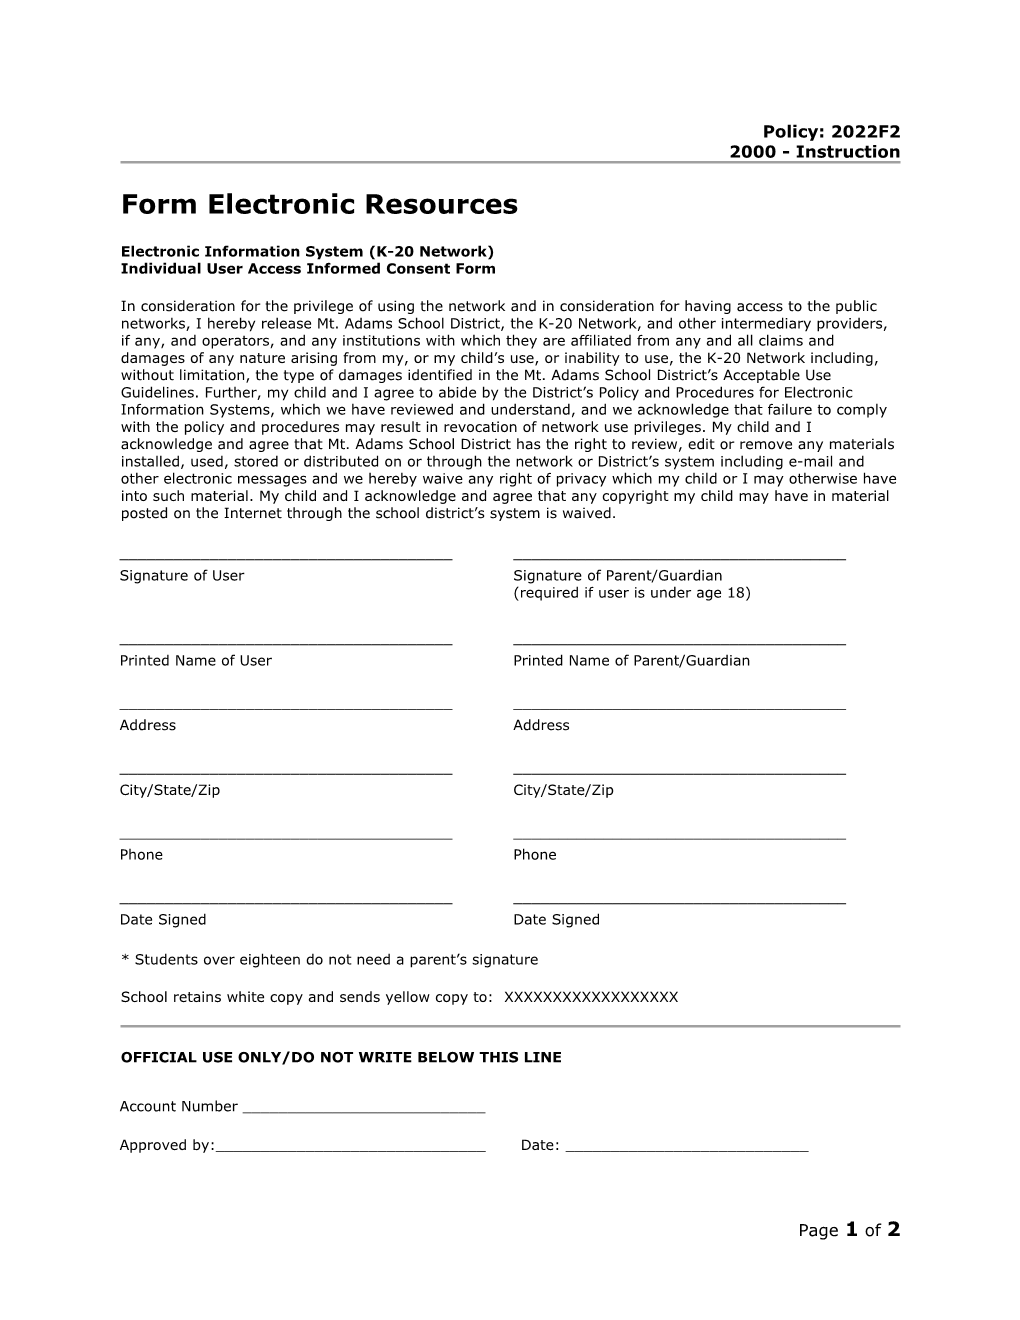 Form Electronic Resources